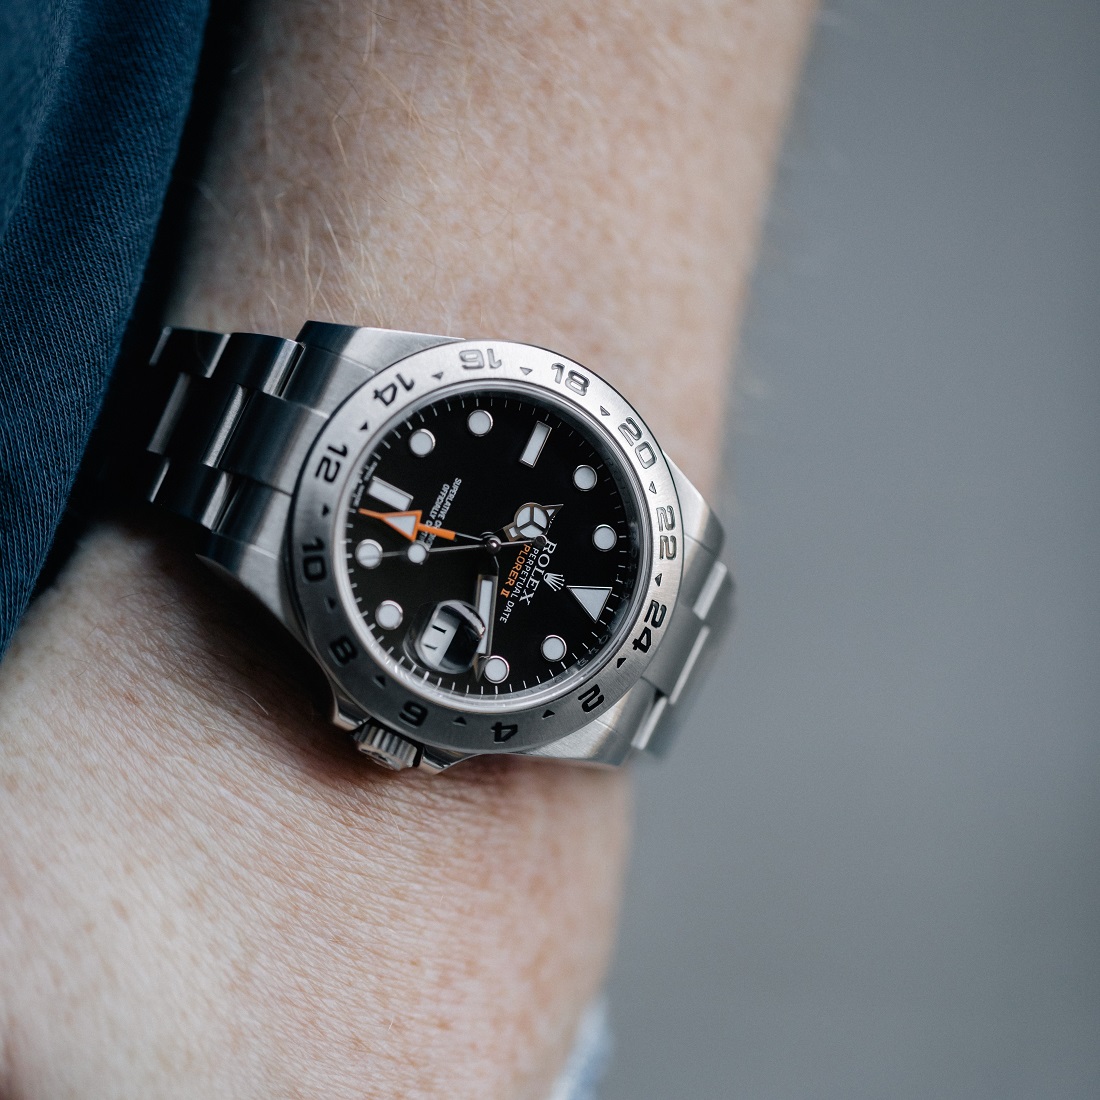 Rolex Explorer II 216570: Special Offer Available At StockX Sales & Auctions 